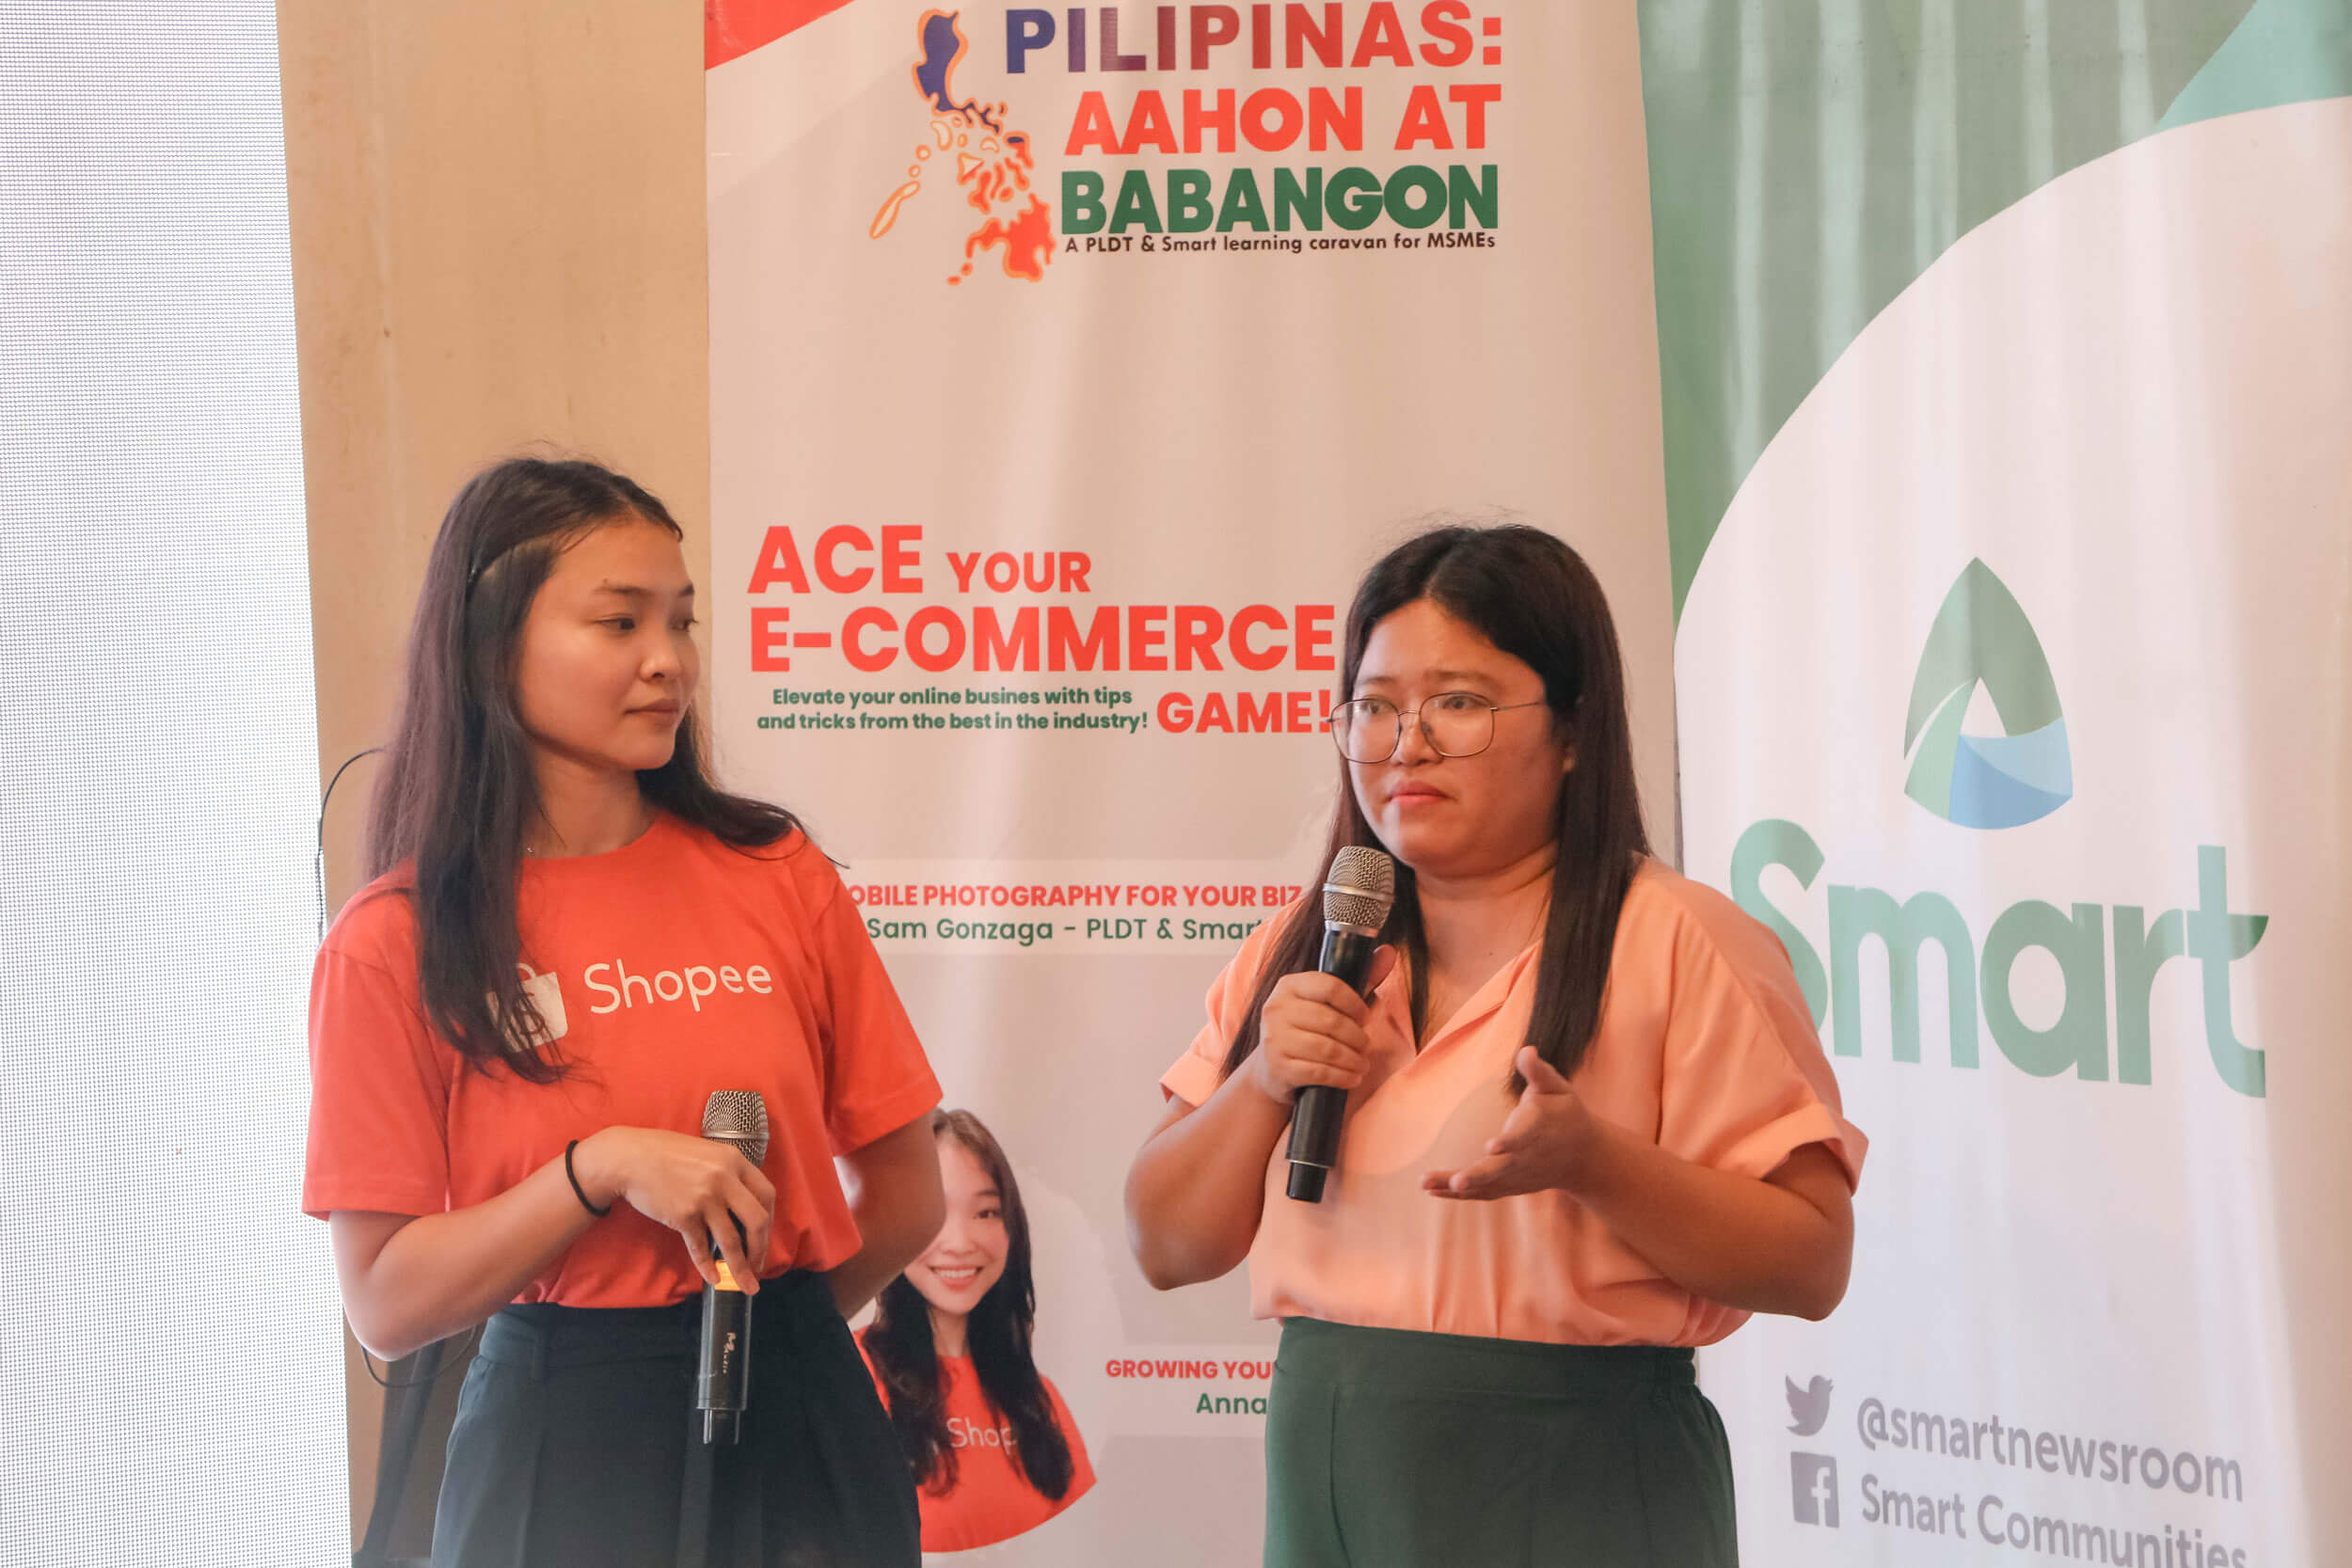 Shopee seller and owner of Stitches and Yarns, Mabel Pagal, shared how technology has widened her market reach and boosted her business.